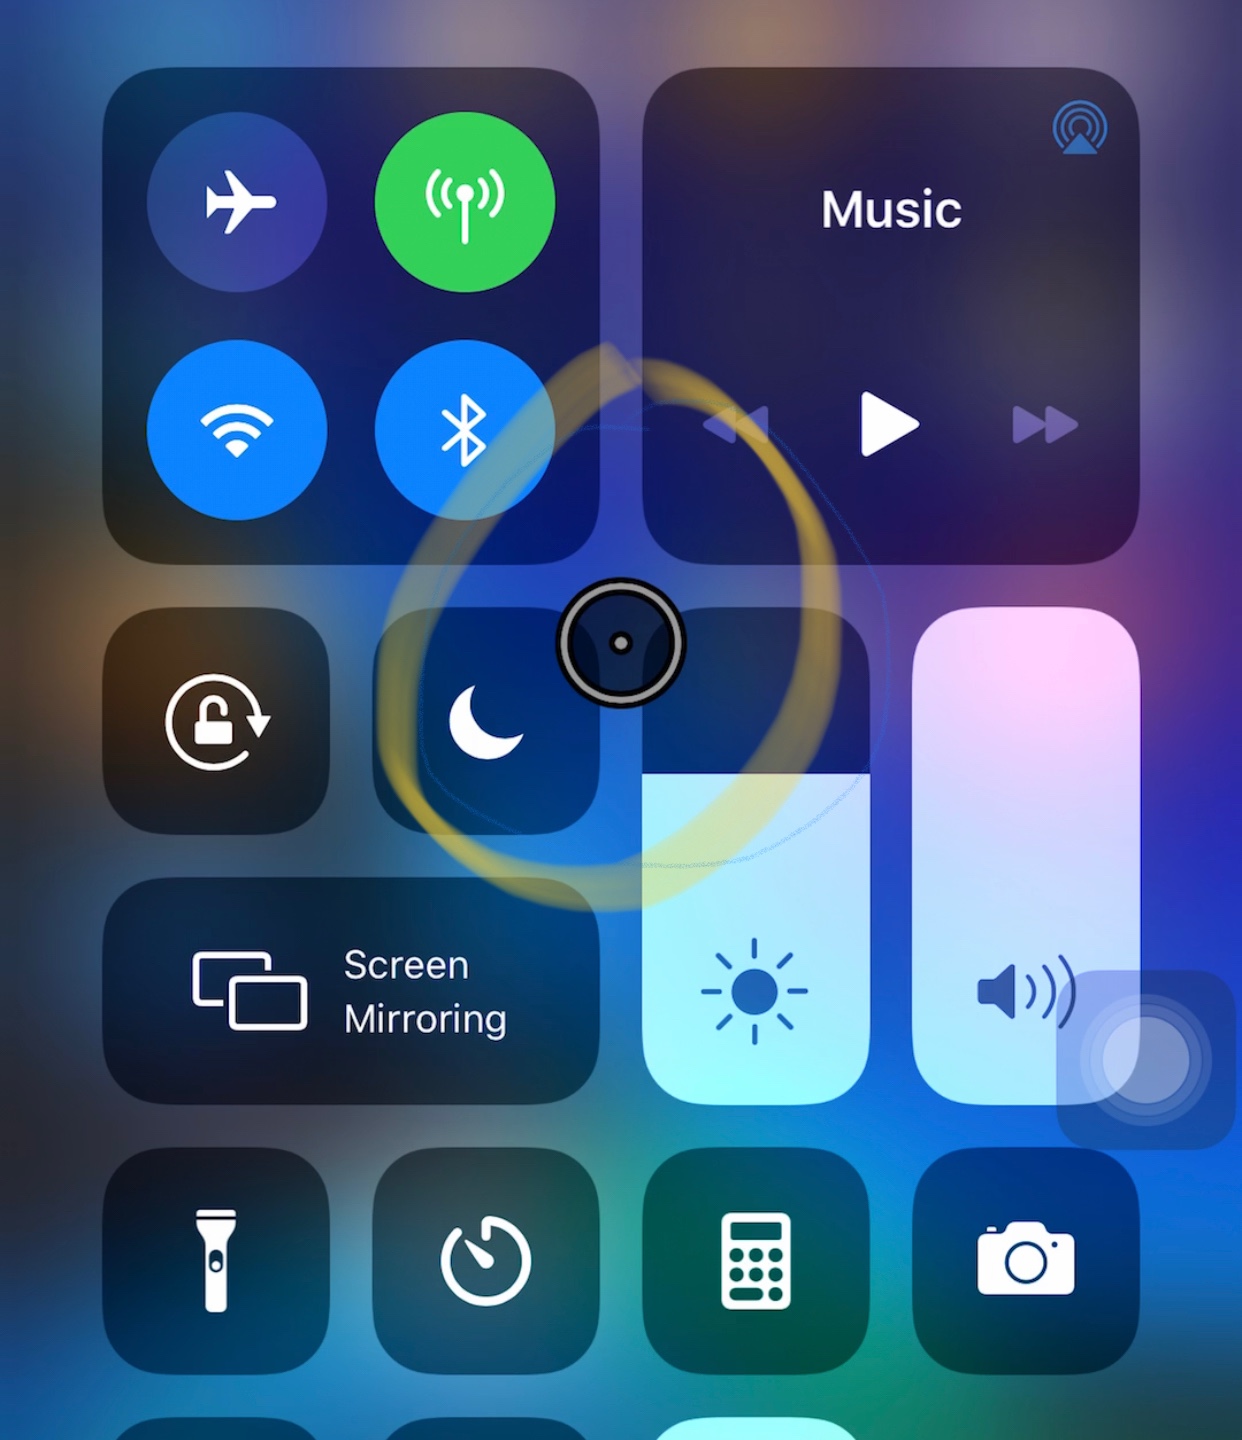 What is the circle with a dot on my iPhone?